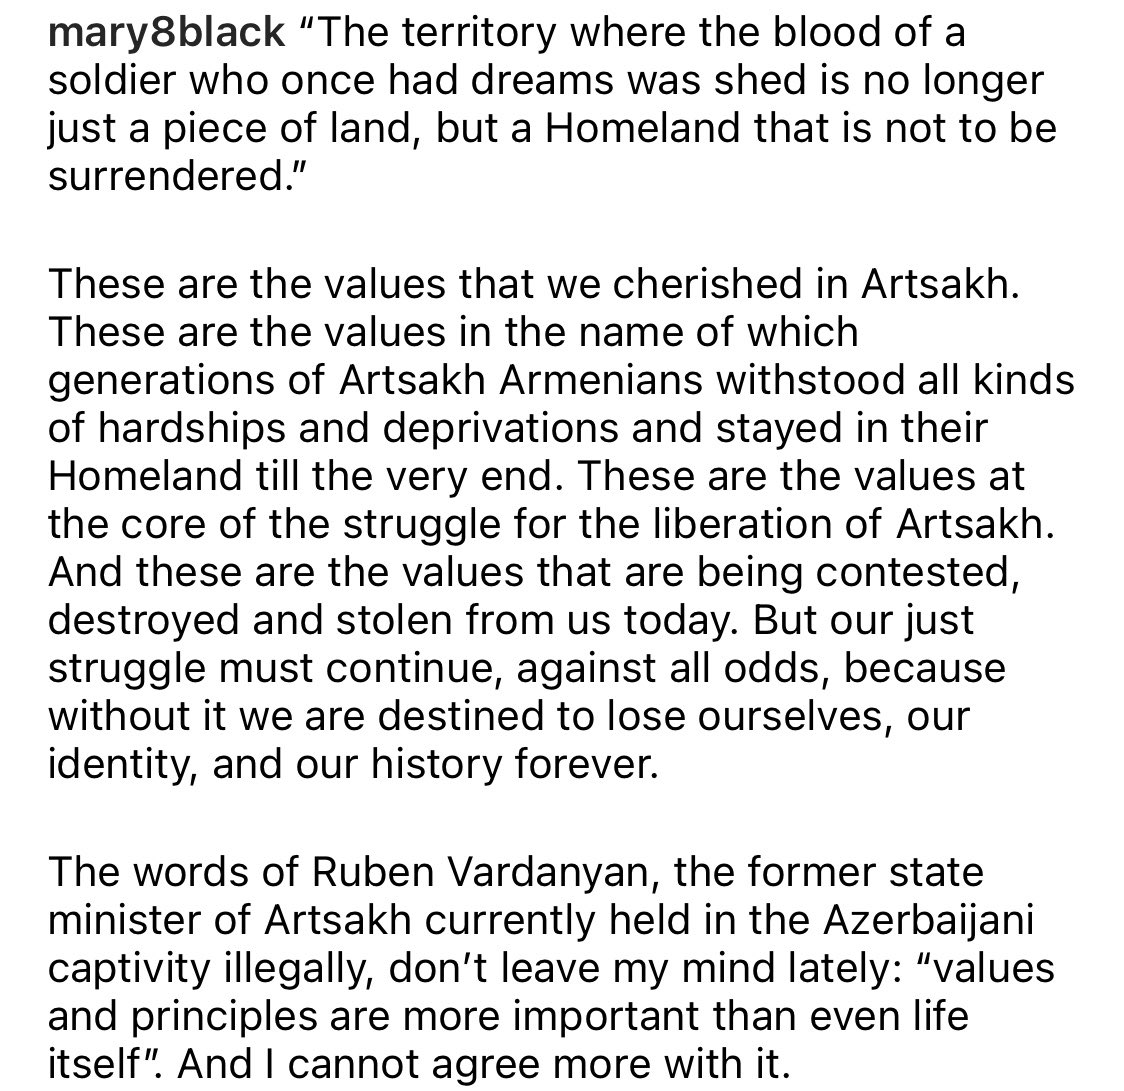 'The territory where the blood of a soldier who once had dreams was shed is no longer a piece of land, but a Homeland that is not to be surrendered' #RubenVardanyan 
#Artsakh 
#Tavush
❤️🇦🇲❤️